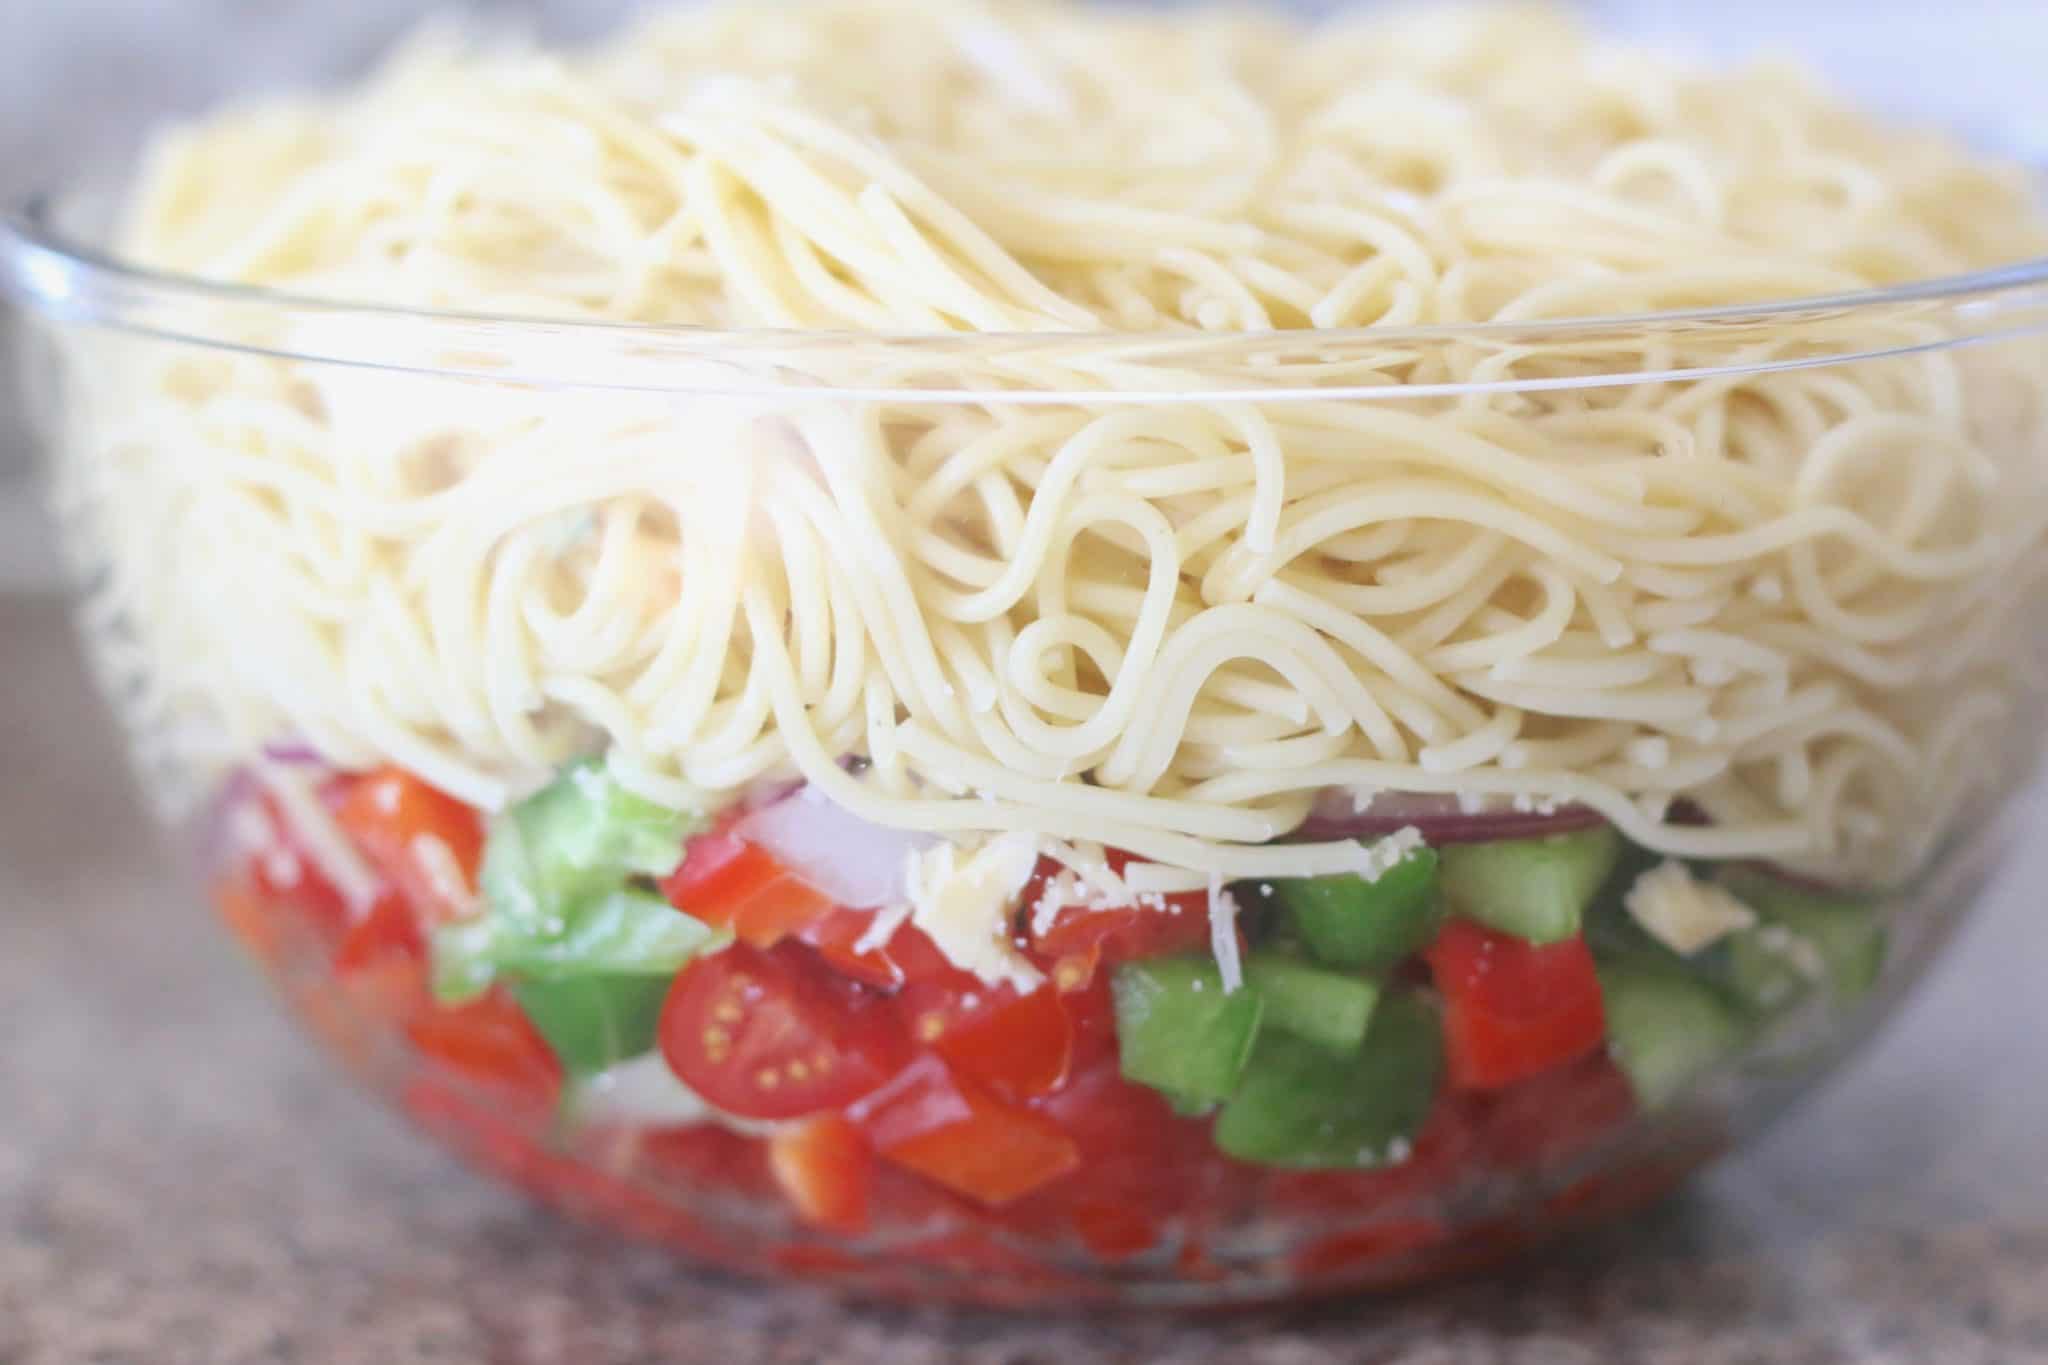 cooked spaghetti noodles, grape tomatoes, peppers, onions in a clear bowl